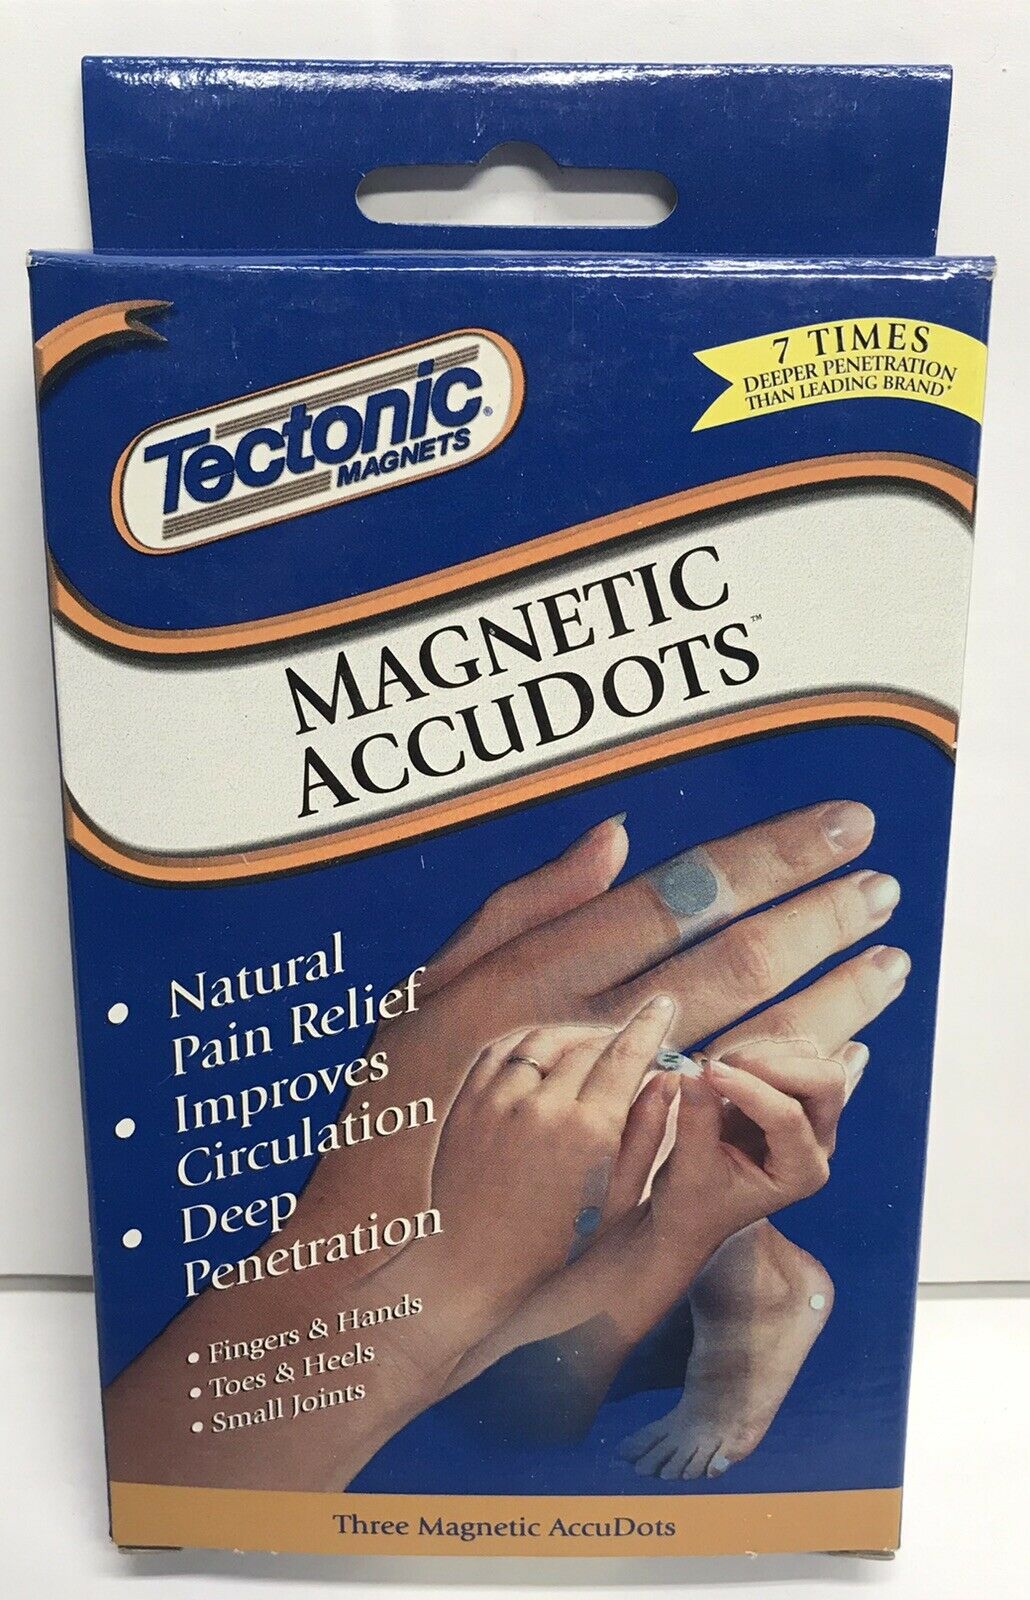 Tectonic Magnets Magnetic Accudots Natural Pain Relief Brand New